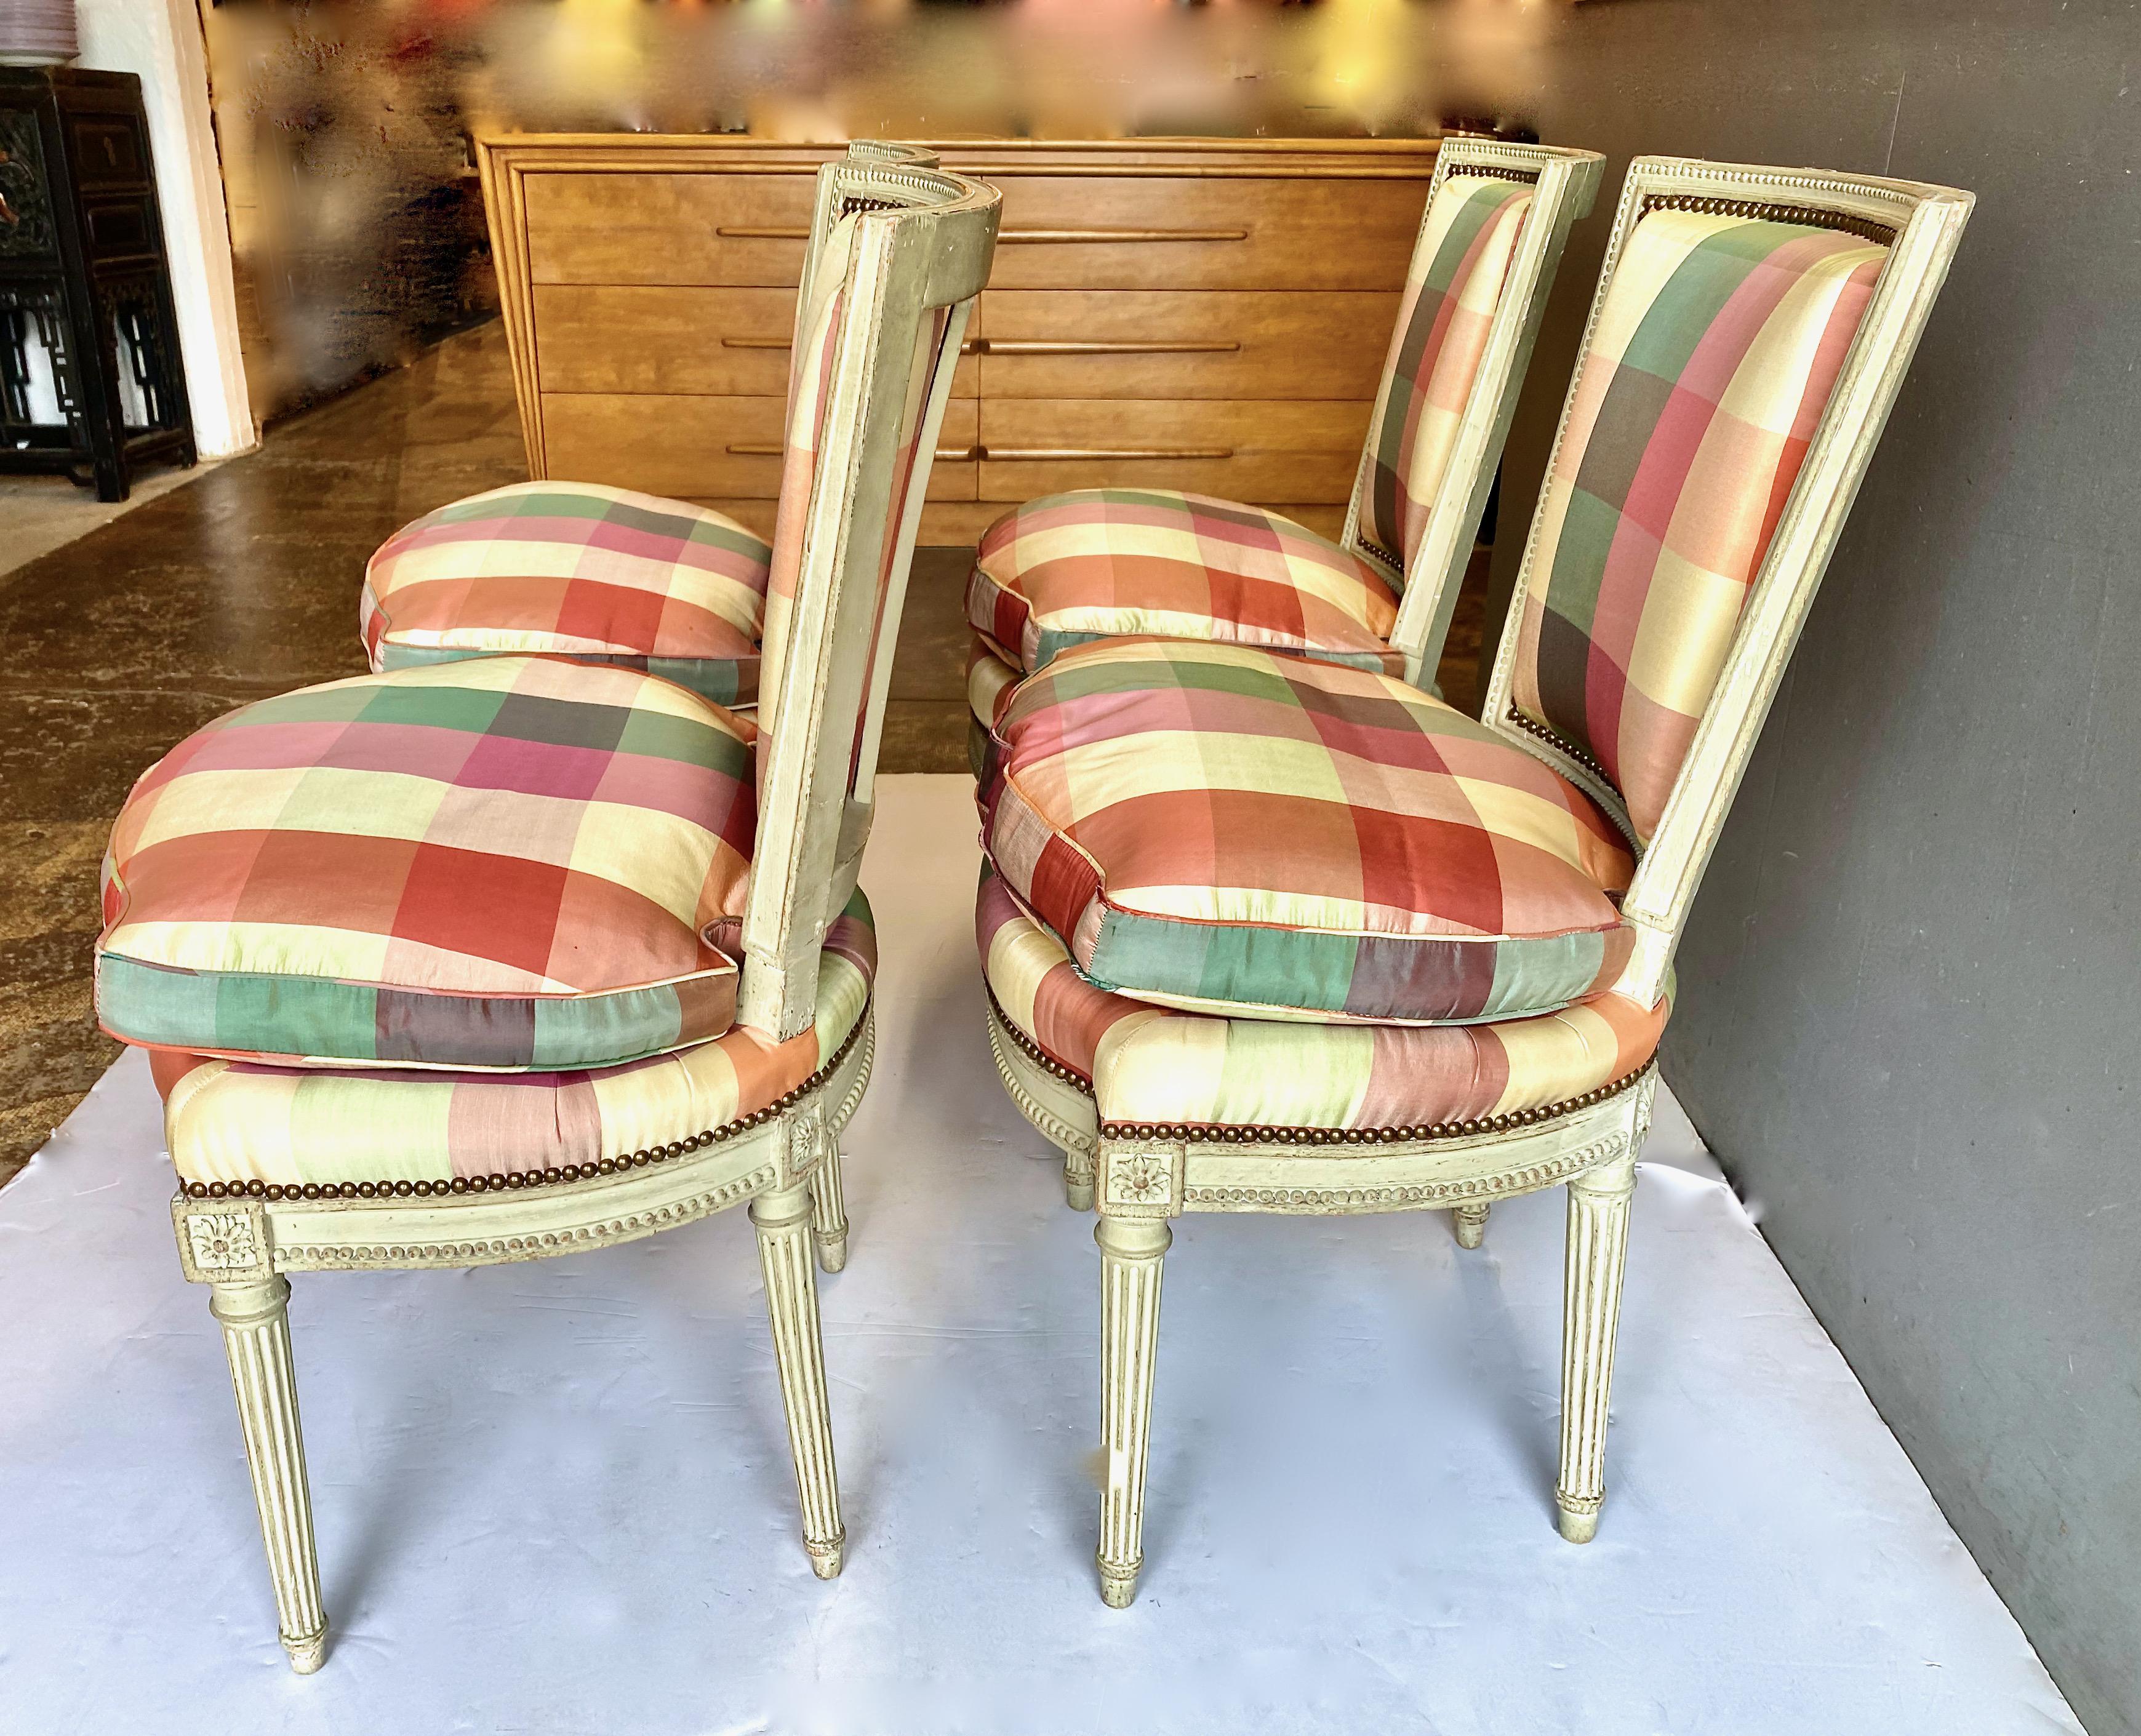 This is a stunning set of four Louis XVI-Style side chairs featuring hand carved fluted legs and beading surrounding the frame of the chairs. The chairs are painted in a traditional pale gray/green. The chairs retain a vintage plaid silk taffeta